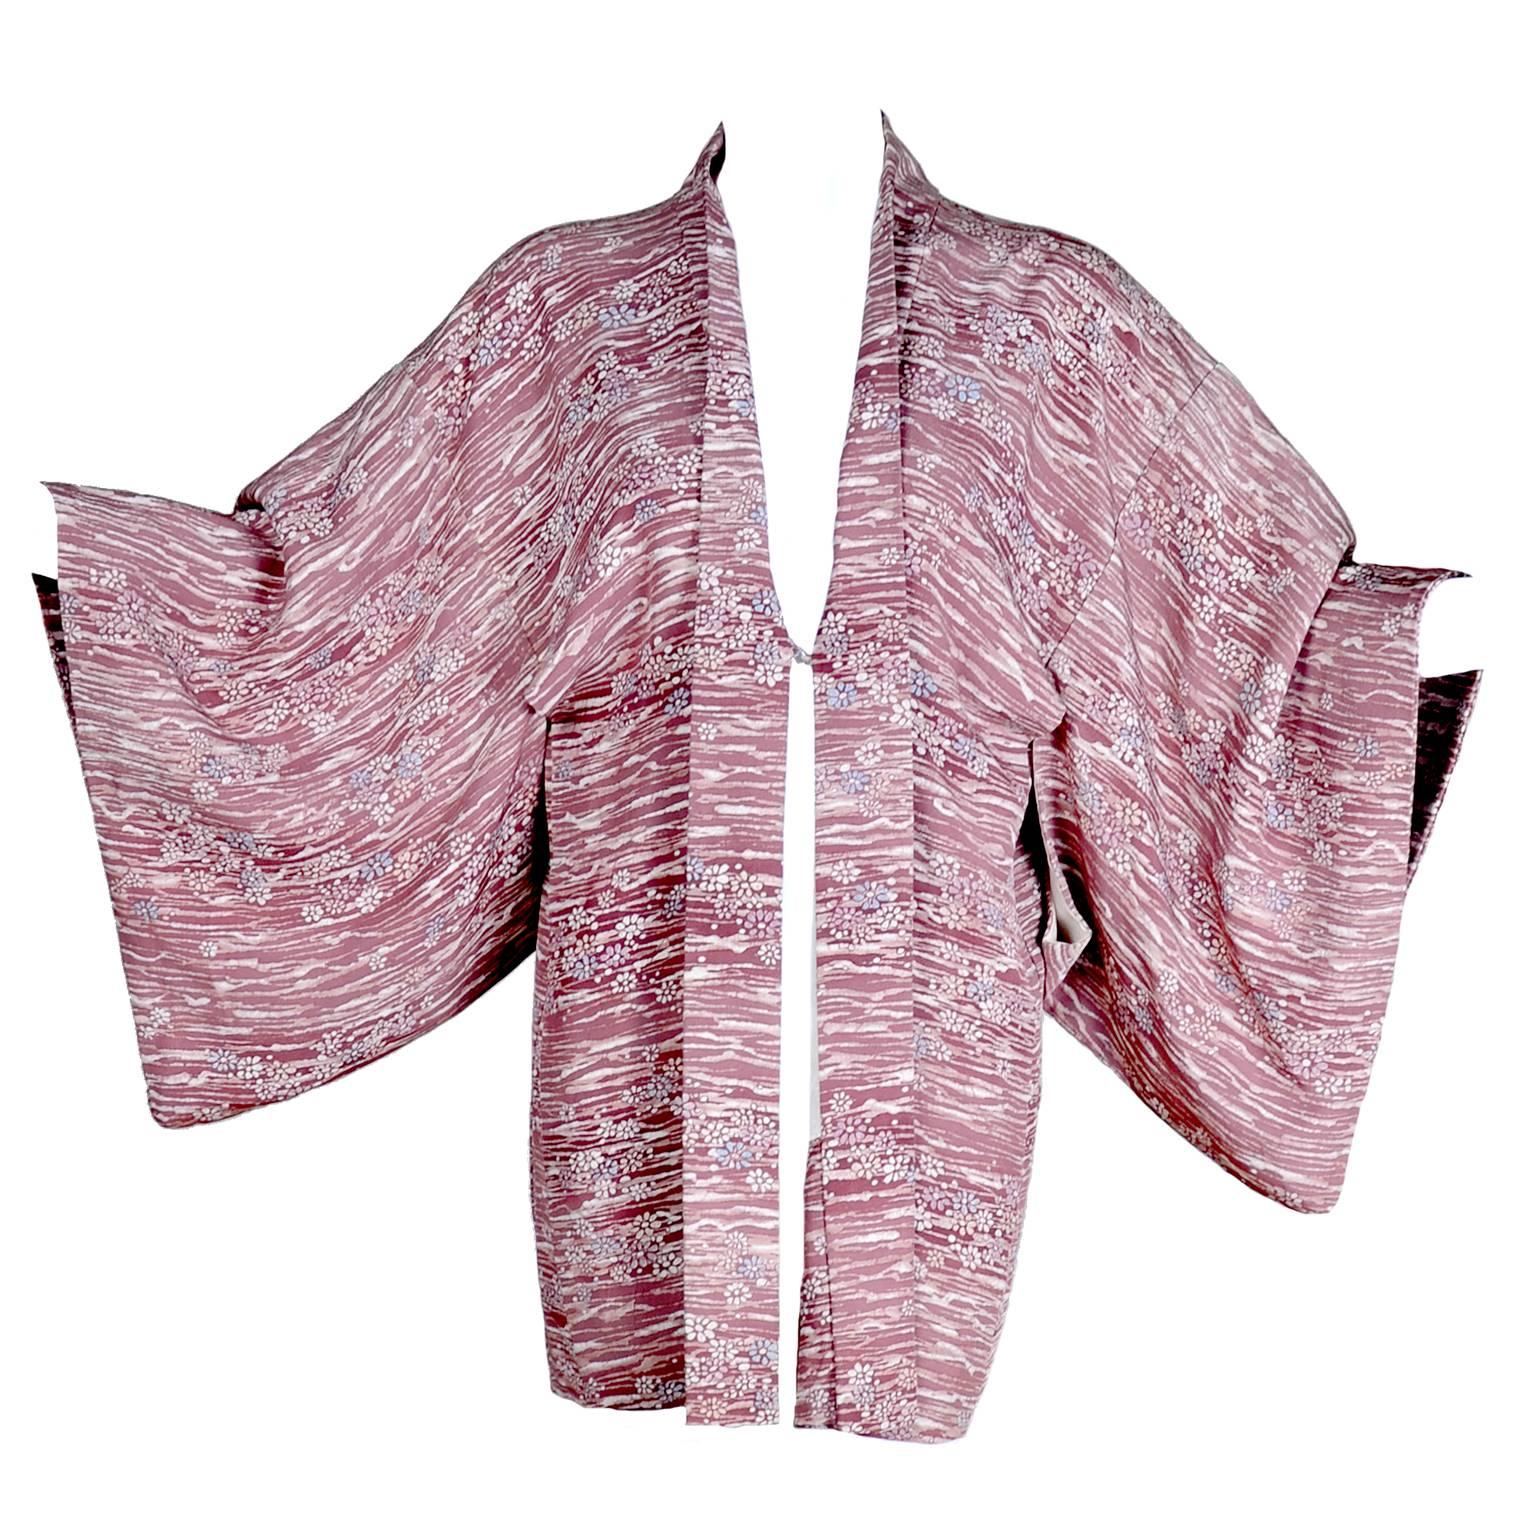 This is a lovely silk kimono in a hand dyed cherry blossom print in shades of burgundy and a hint of blue.  This beautiful vintage kimono can be worn as a jacket over a dress or a pair of pants.  The kimono is from an estate of collectible textiles